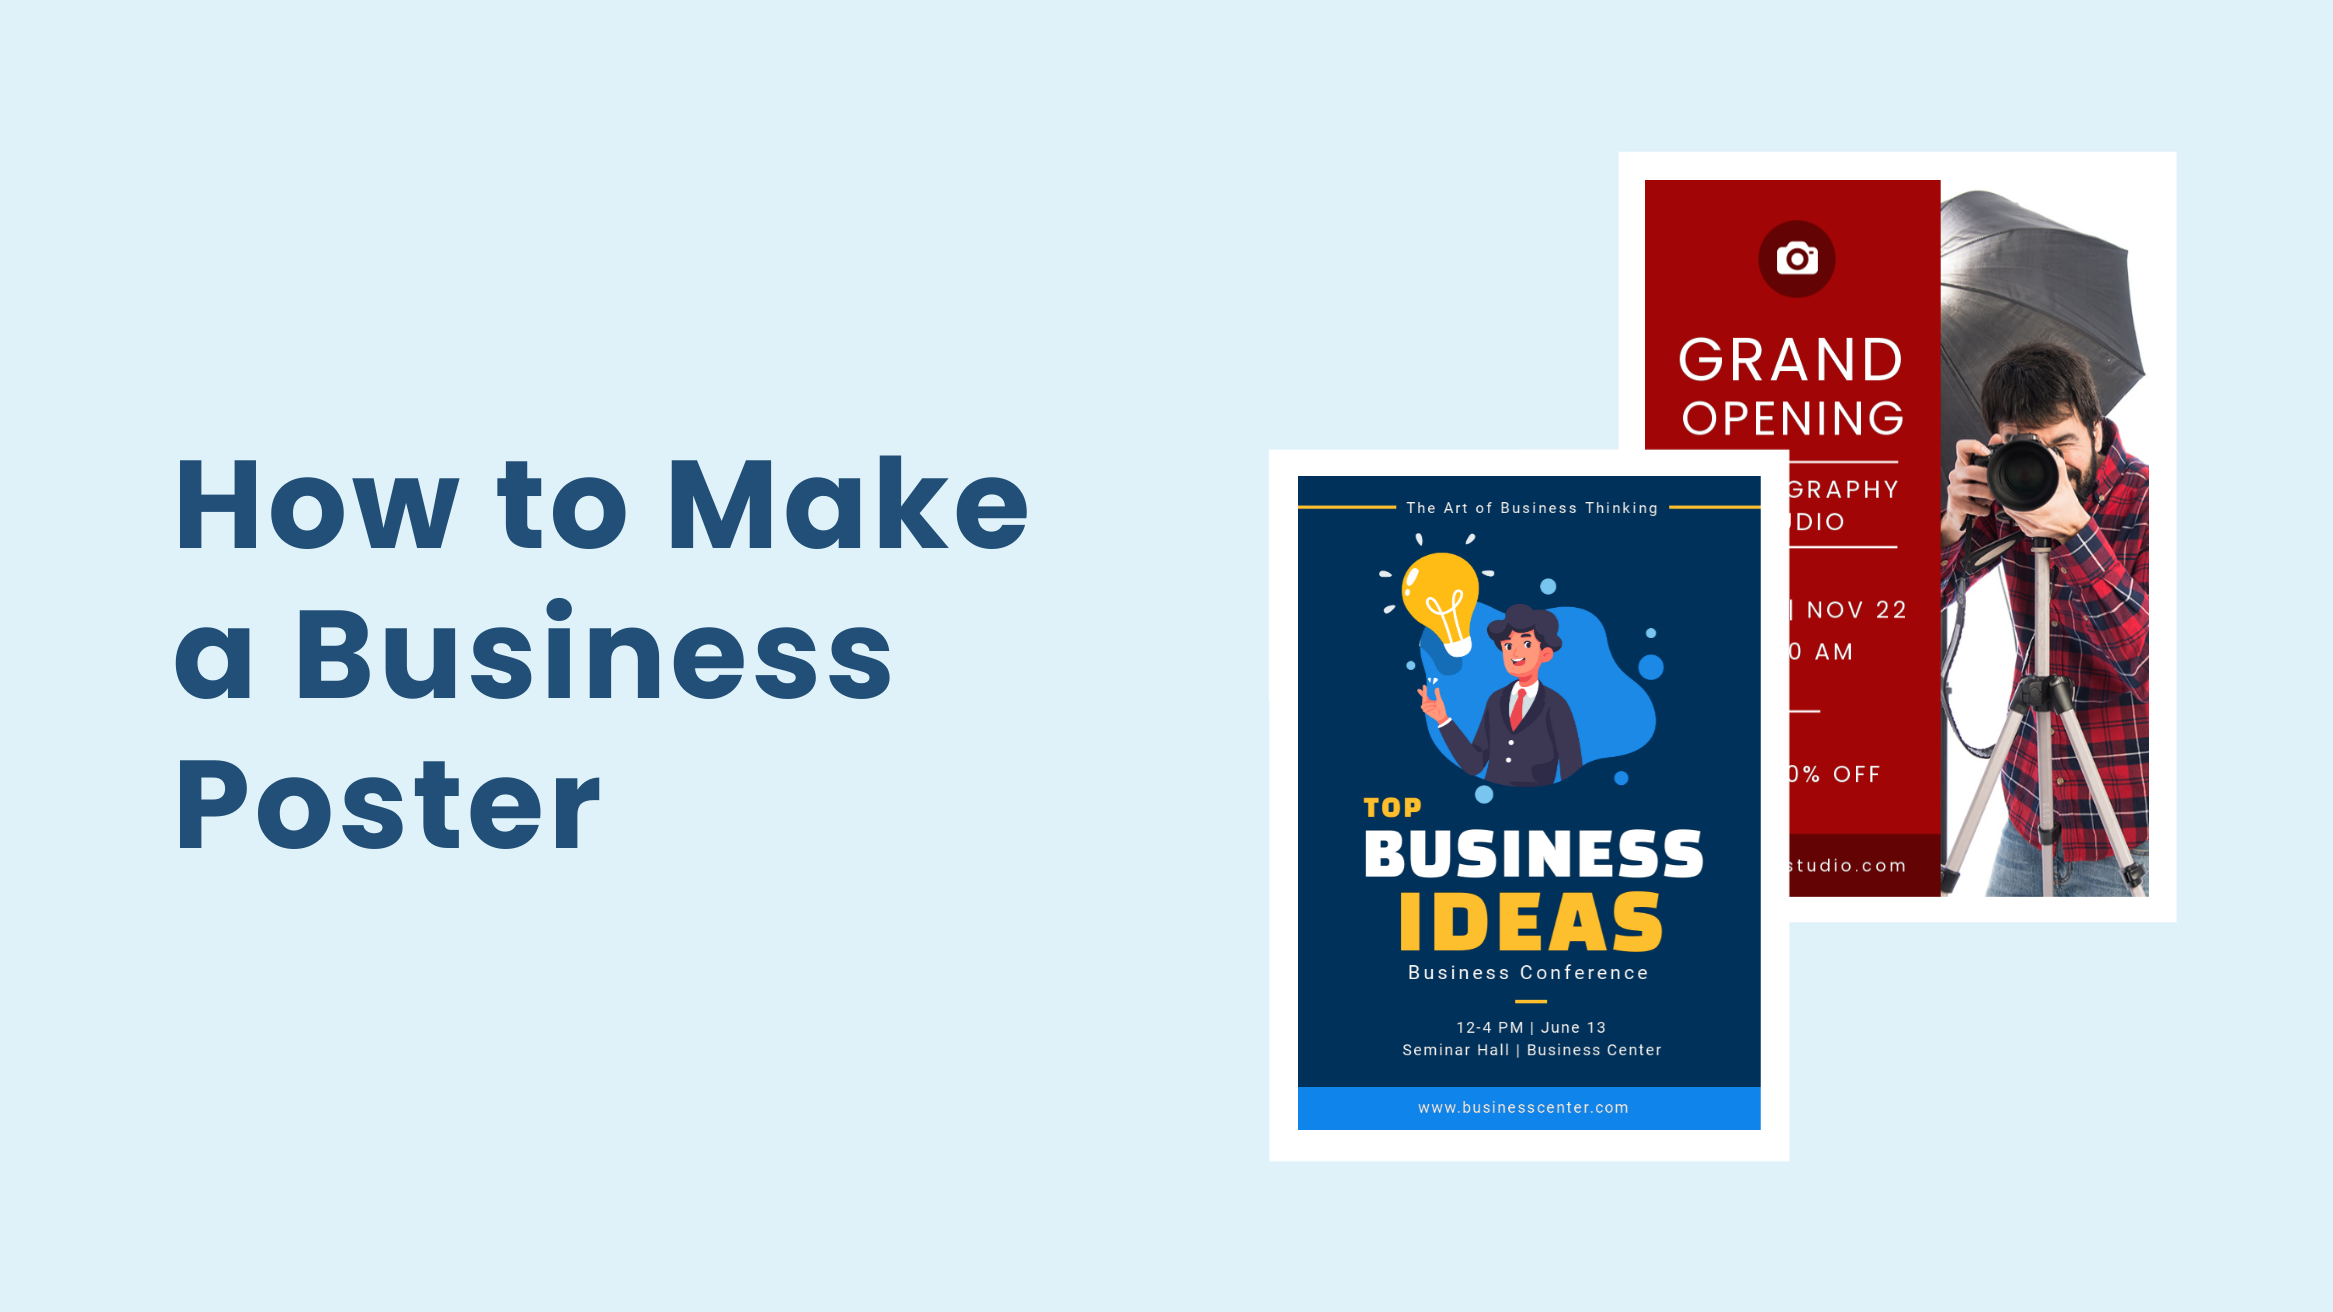 How to Make a Business Poster